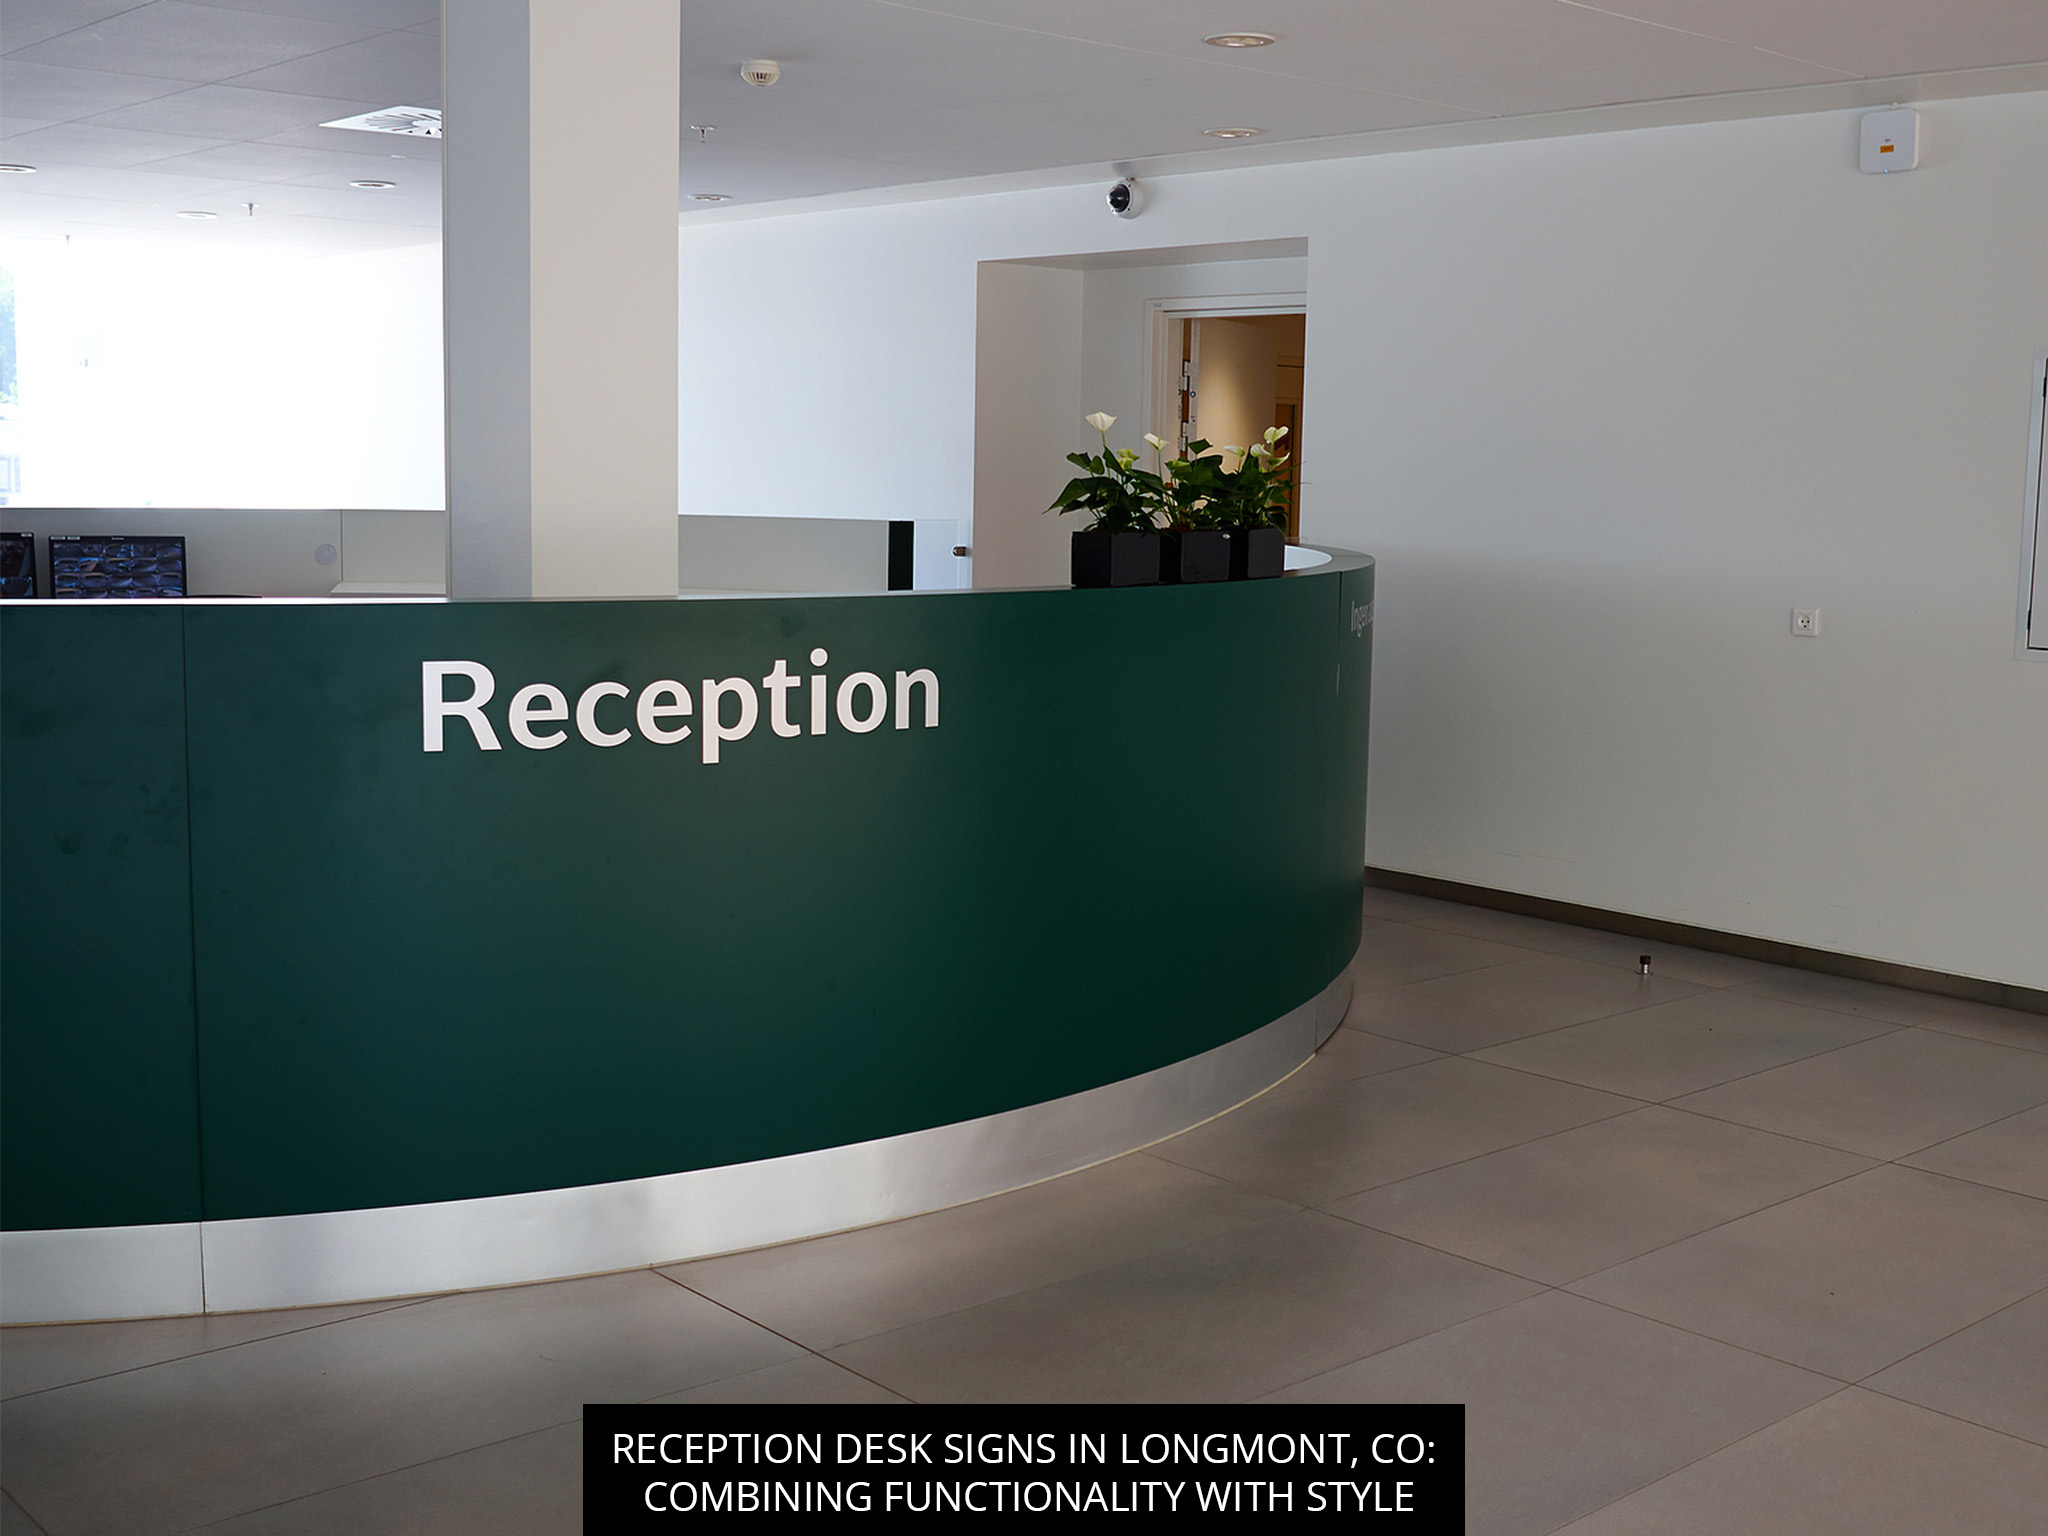 Reception Desk Signs in Longmont, CO: Combining Functionality with Style